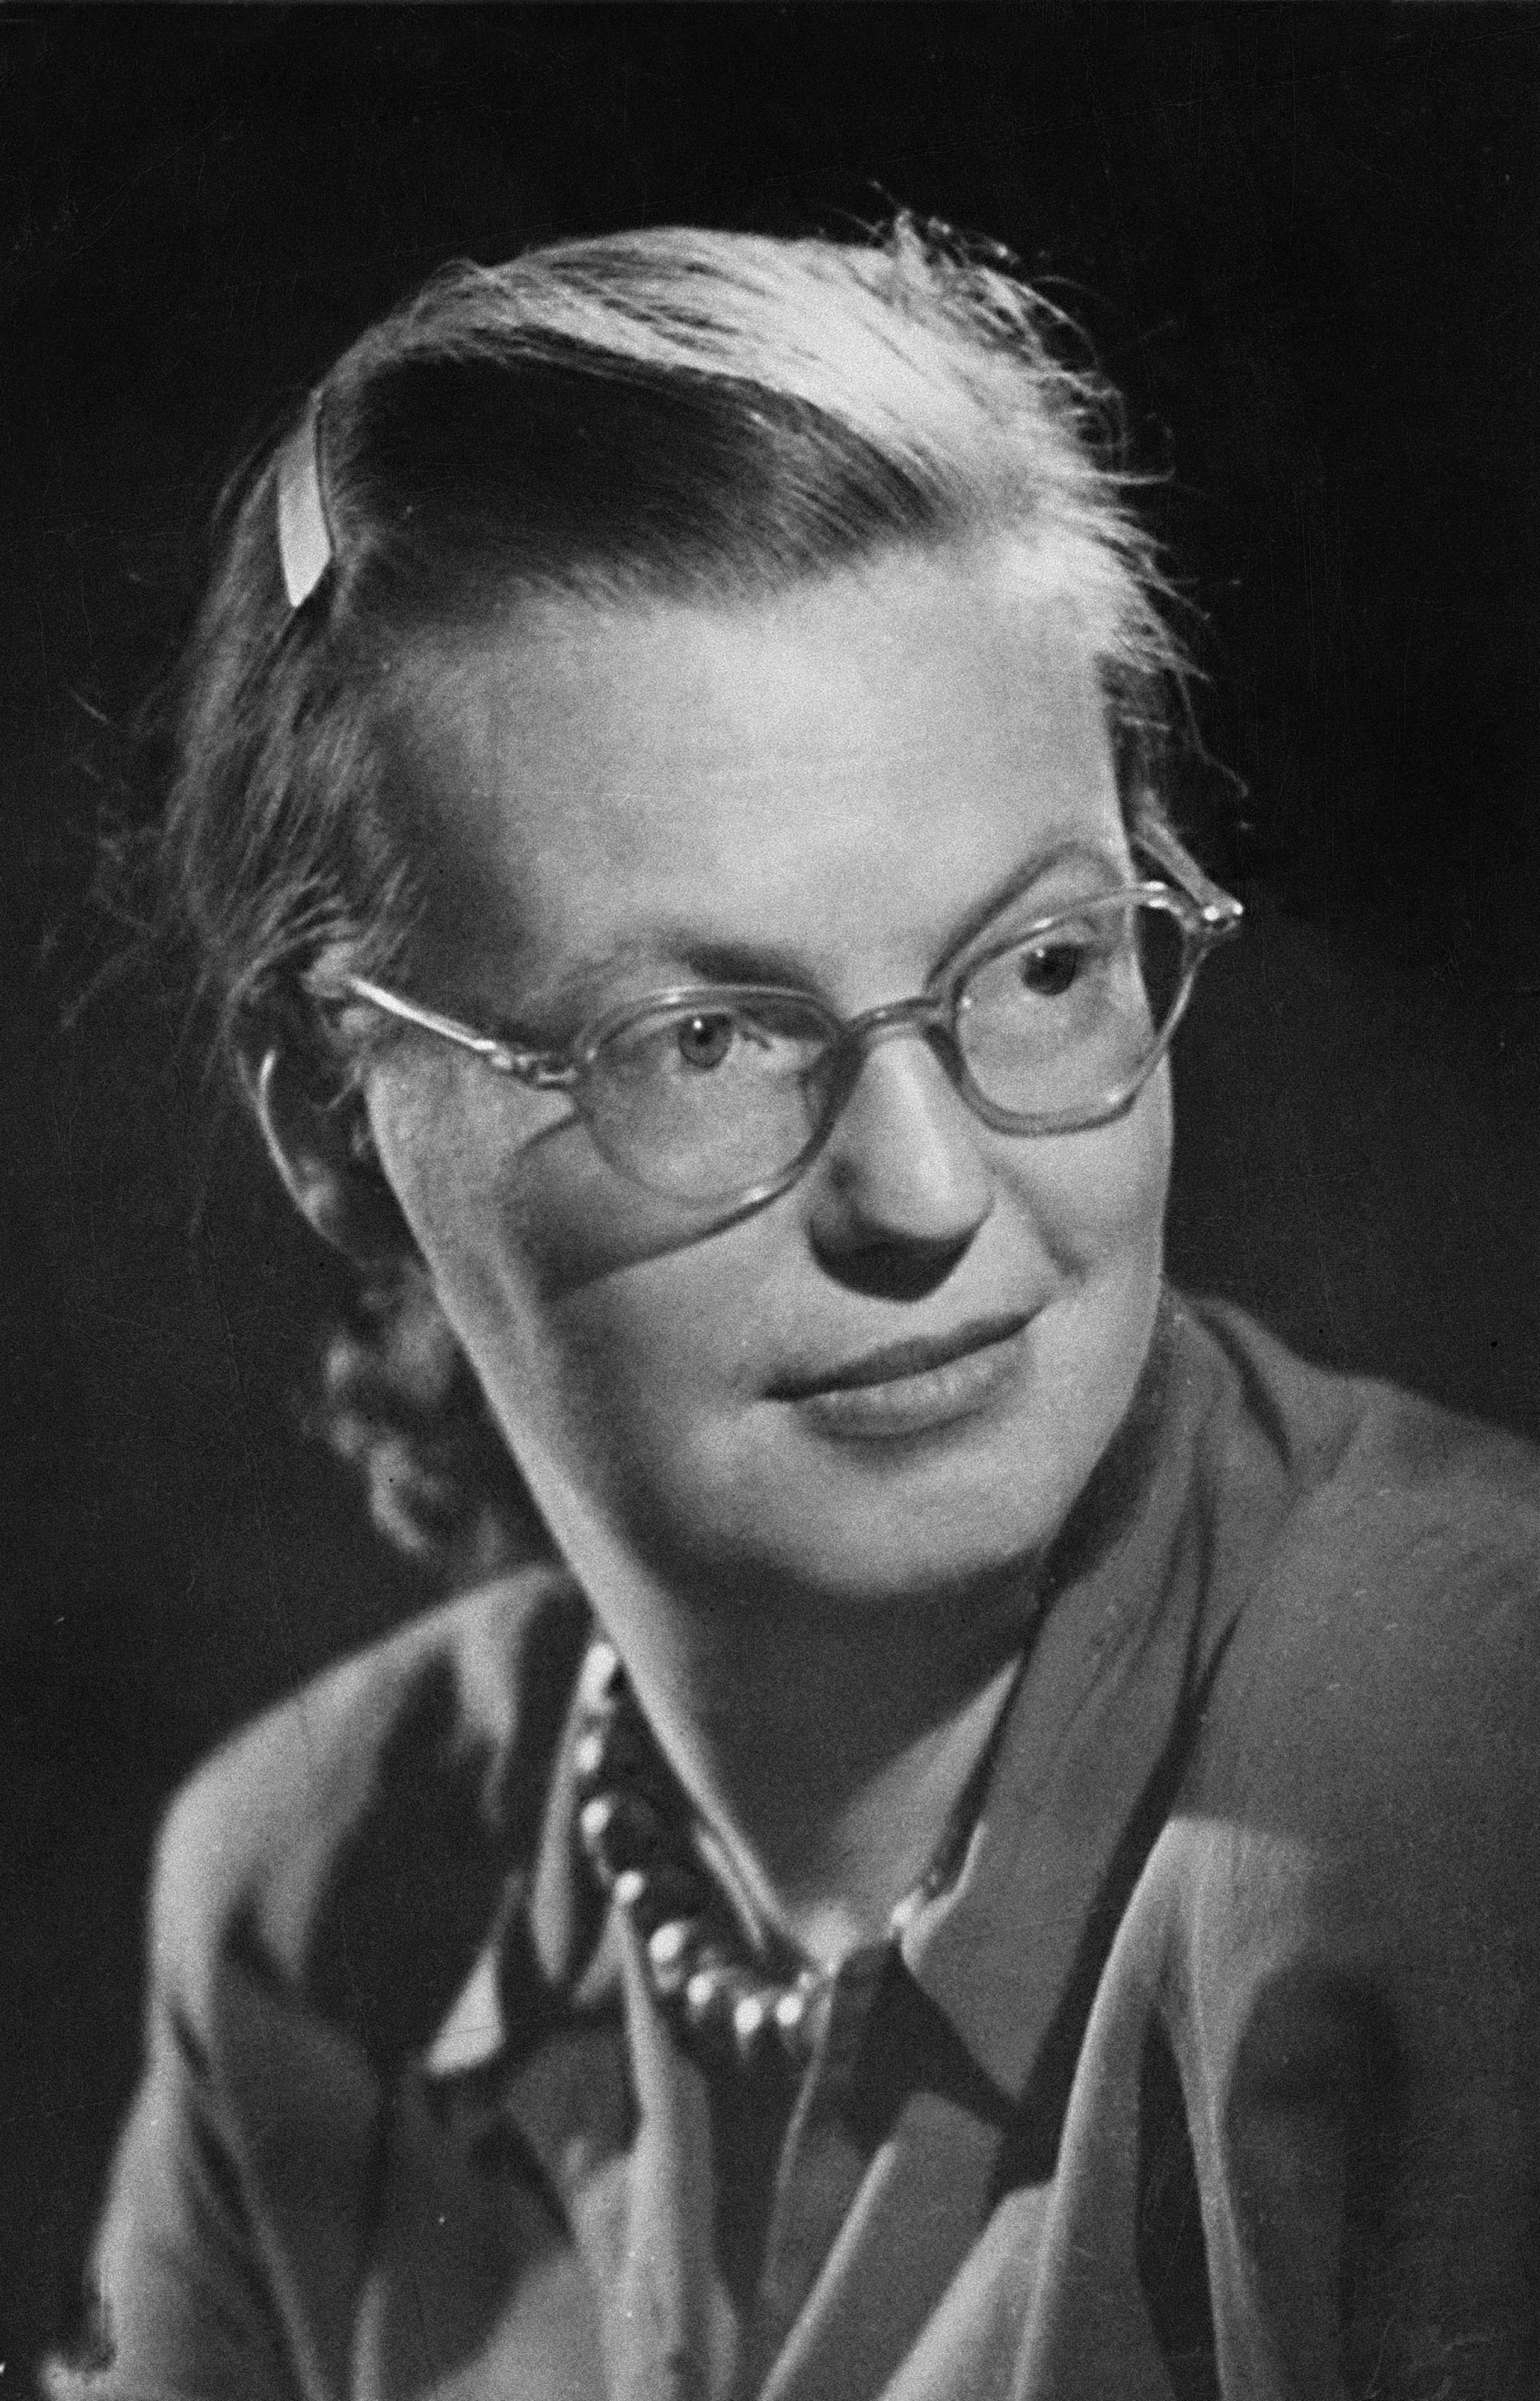 Shirley Jackson, the author of "The Road Through the Wall", is seen in this April 16, 1951 photo. (AP)